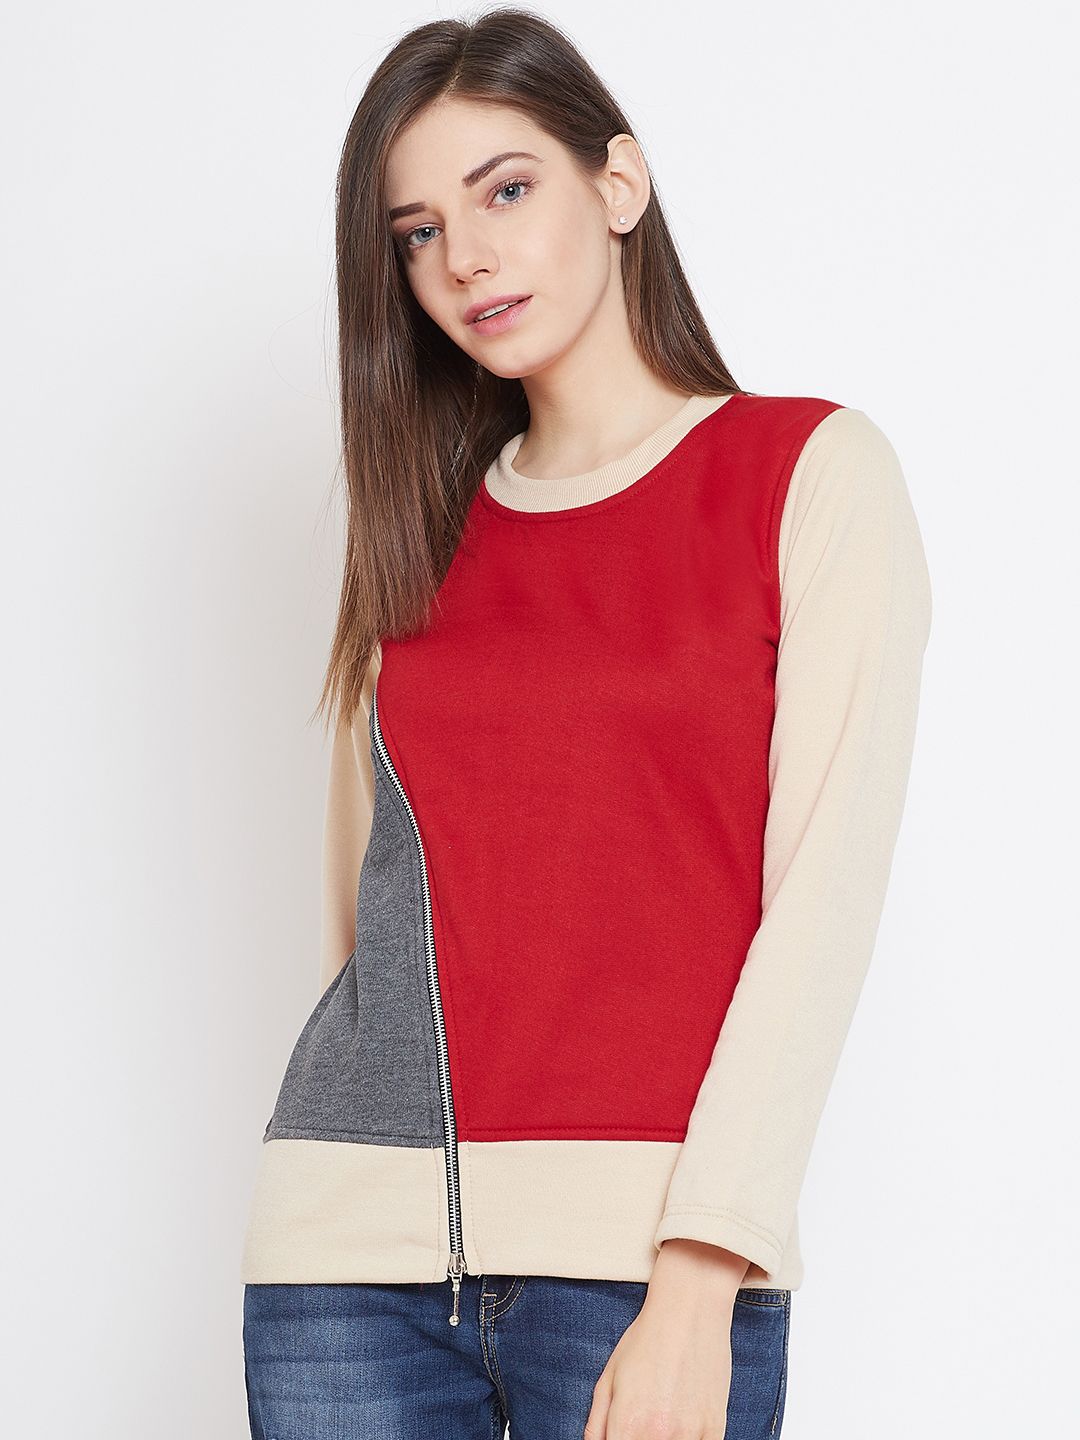 Belle Fille Women Red & Charcoal Grey Colourblocked Sweatshirt Price in India